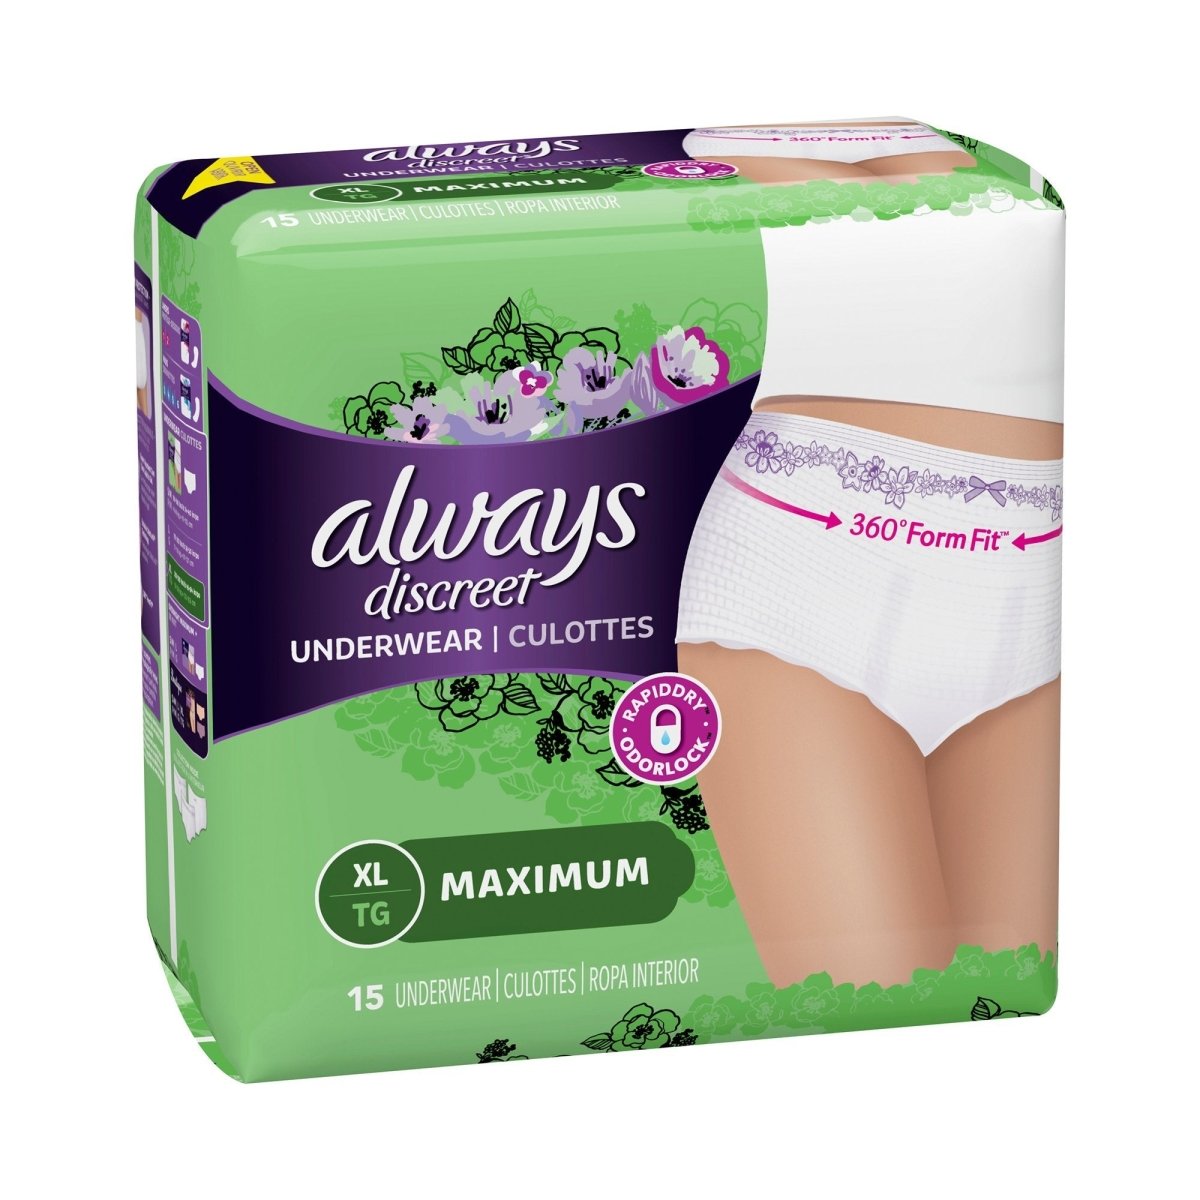 TENA Women Super Plus Disposable Underwear Female Pull On with Tear Away  Seams 